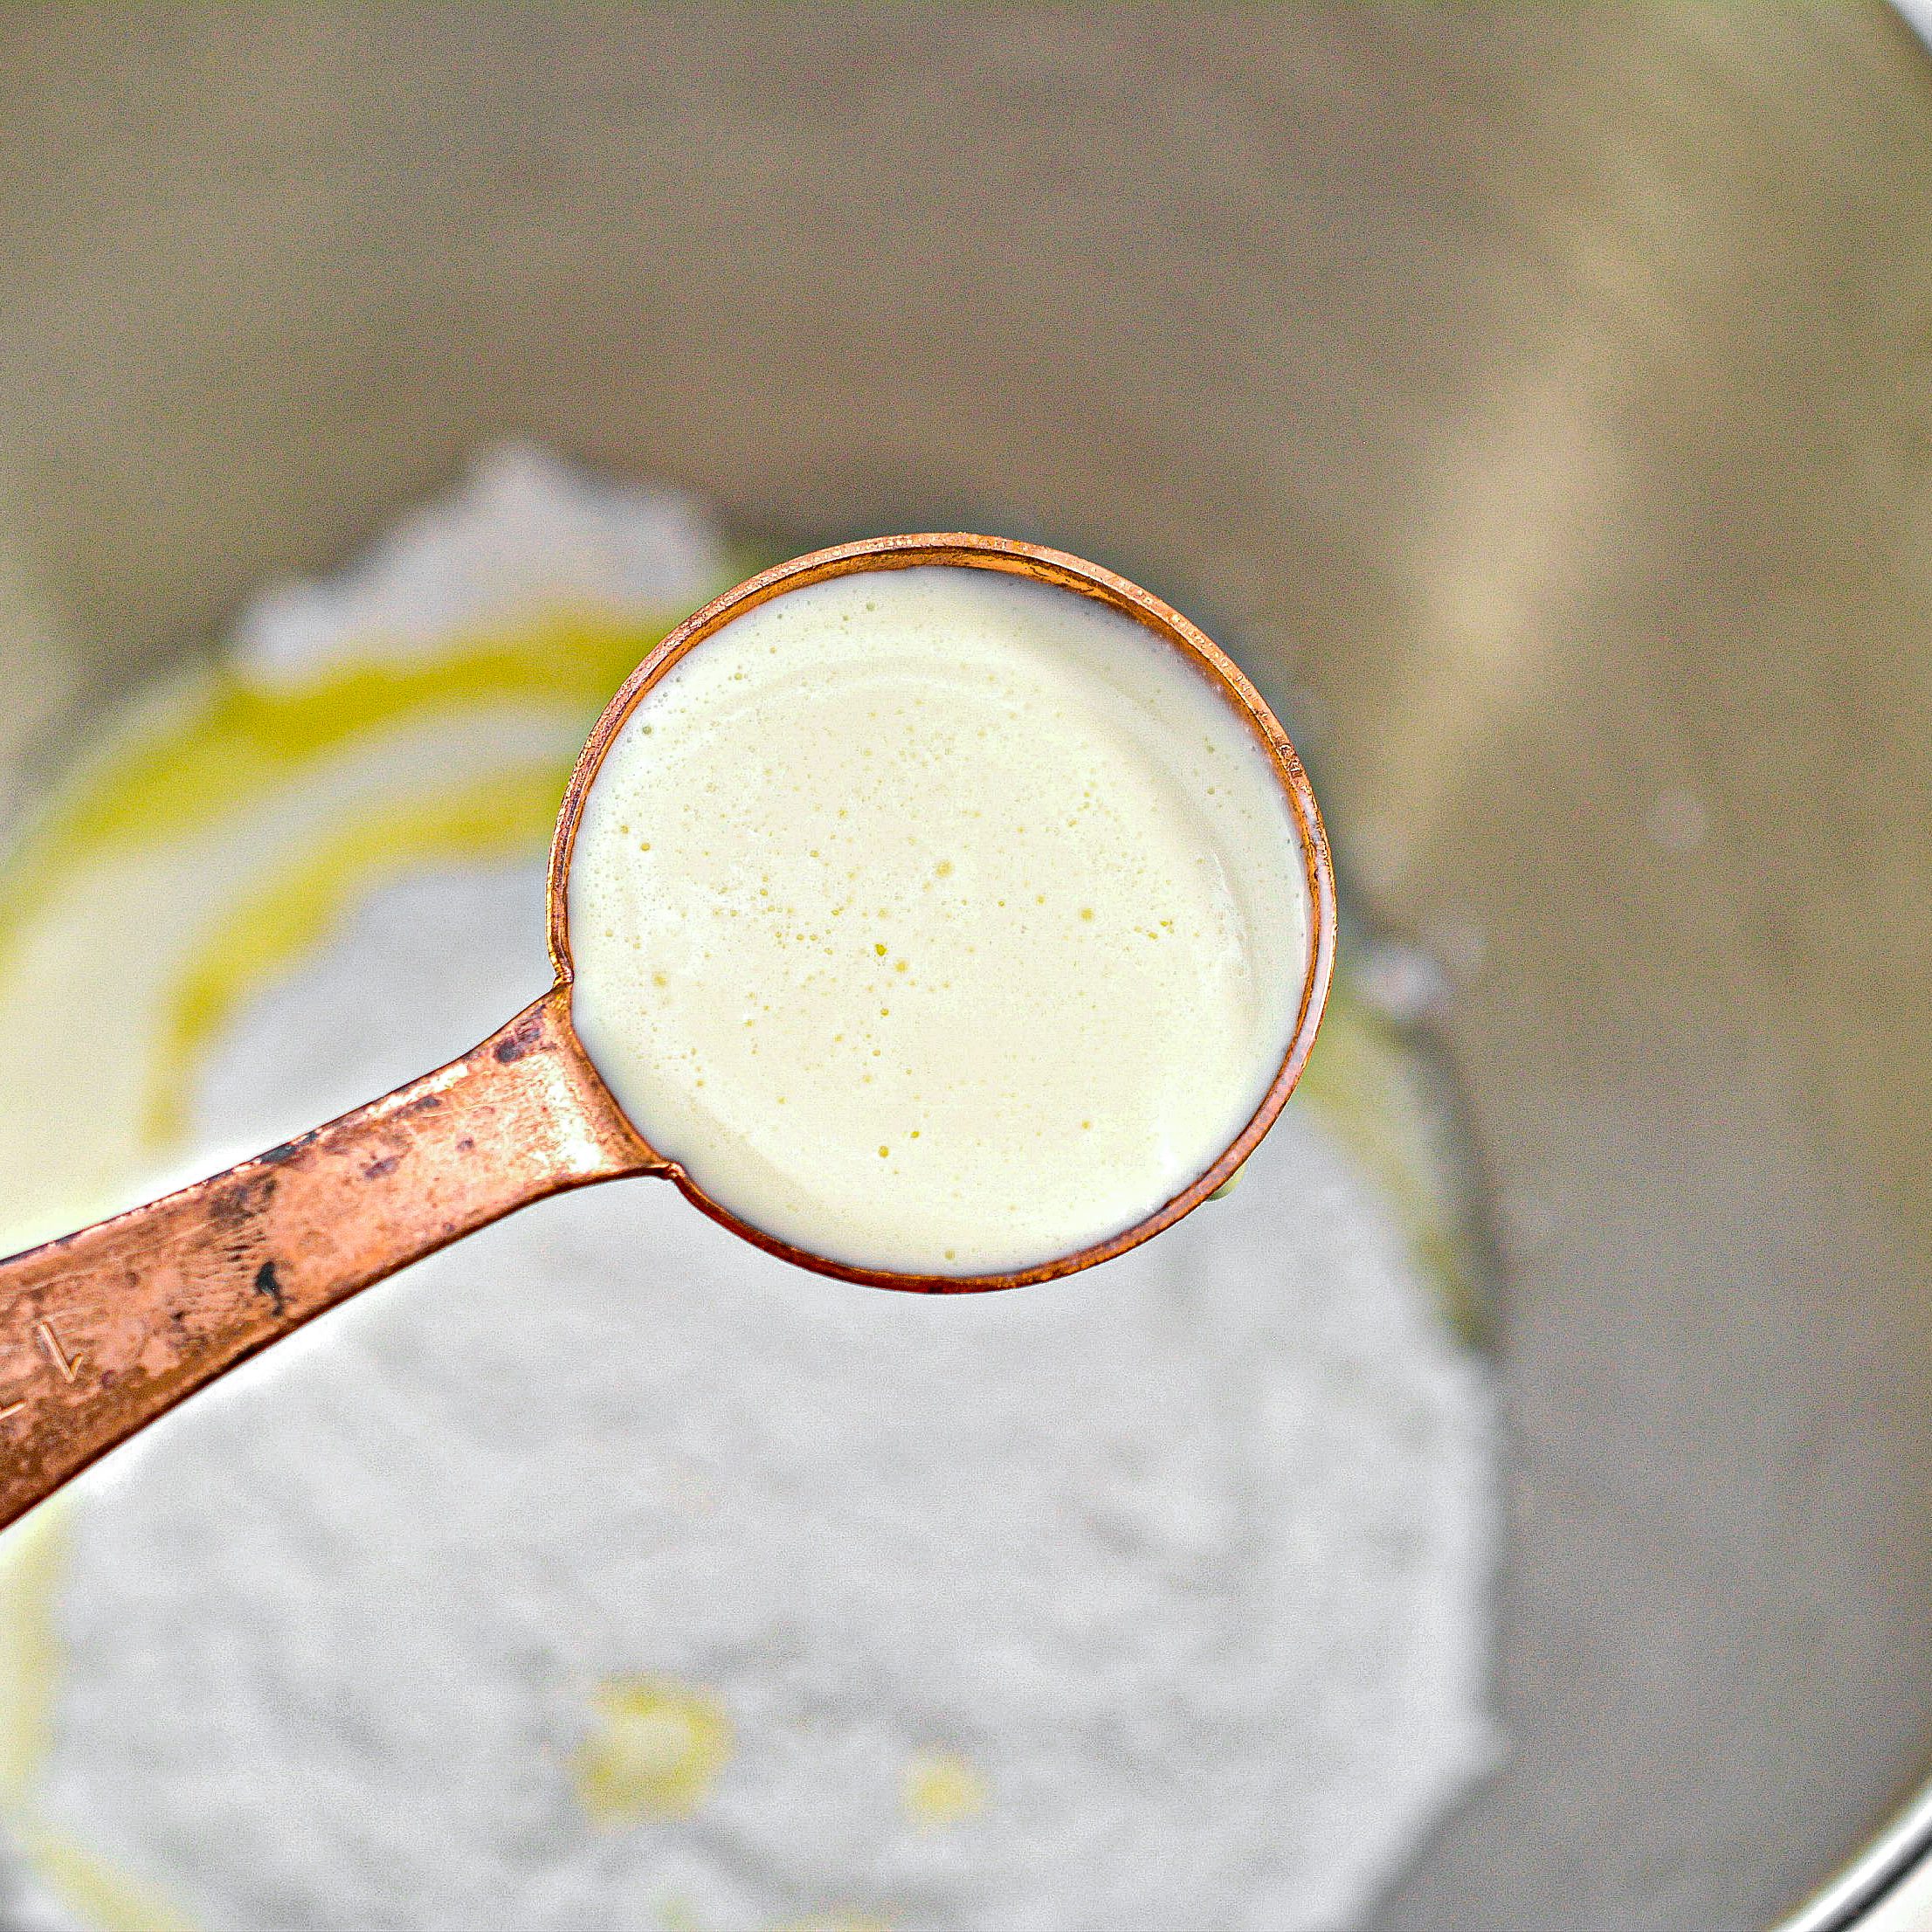 In a mixing bowl, combine the ingredients for the glaze until smooth and creamy.